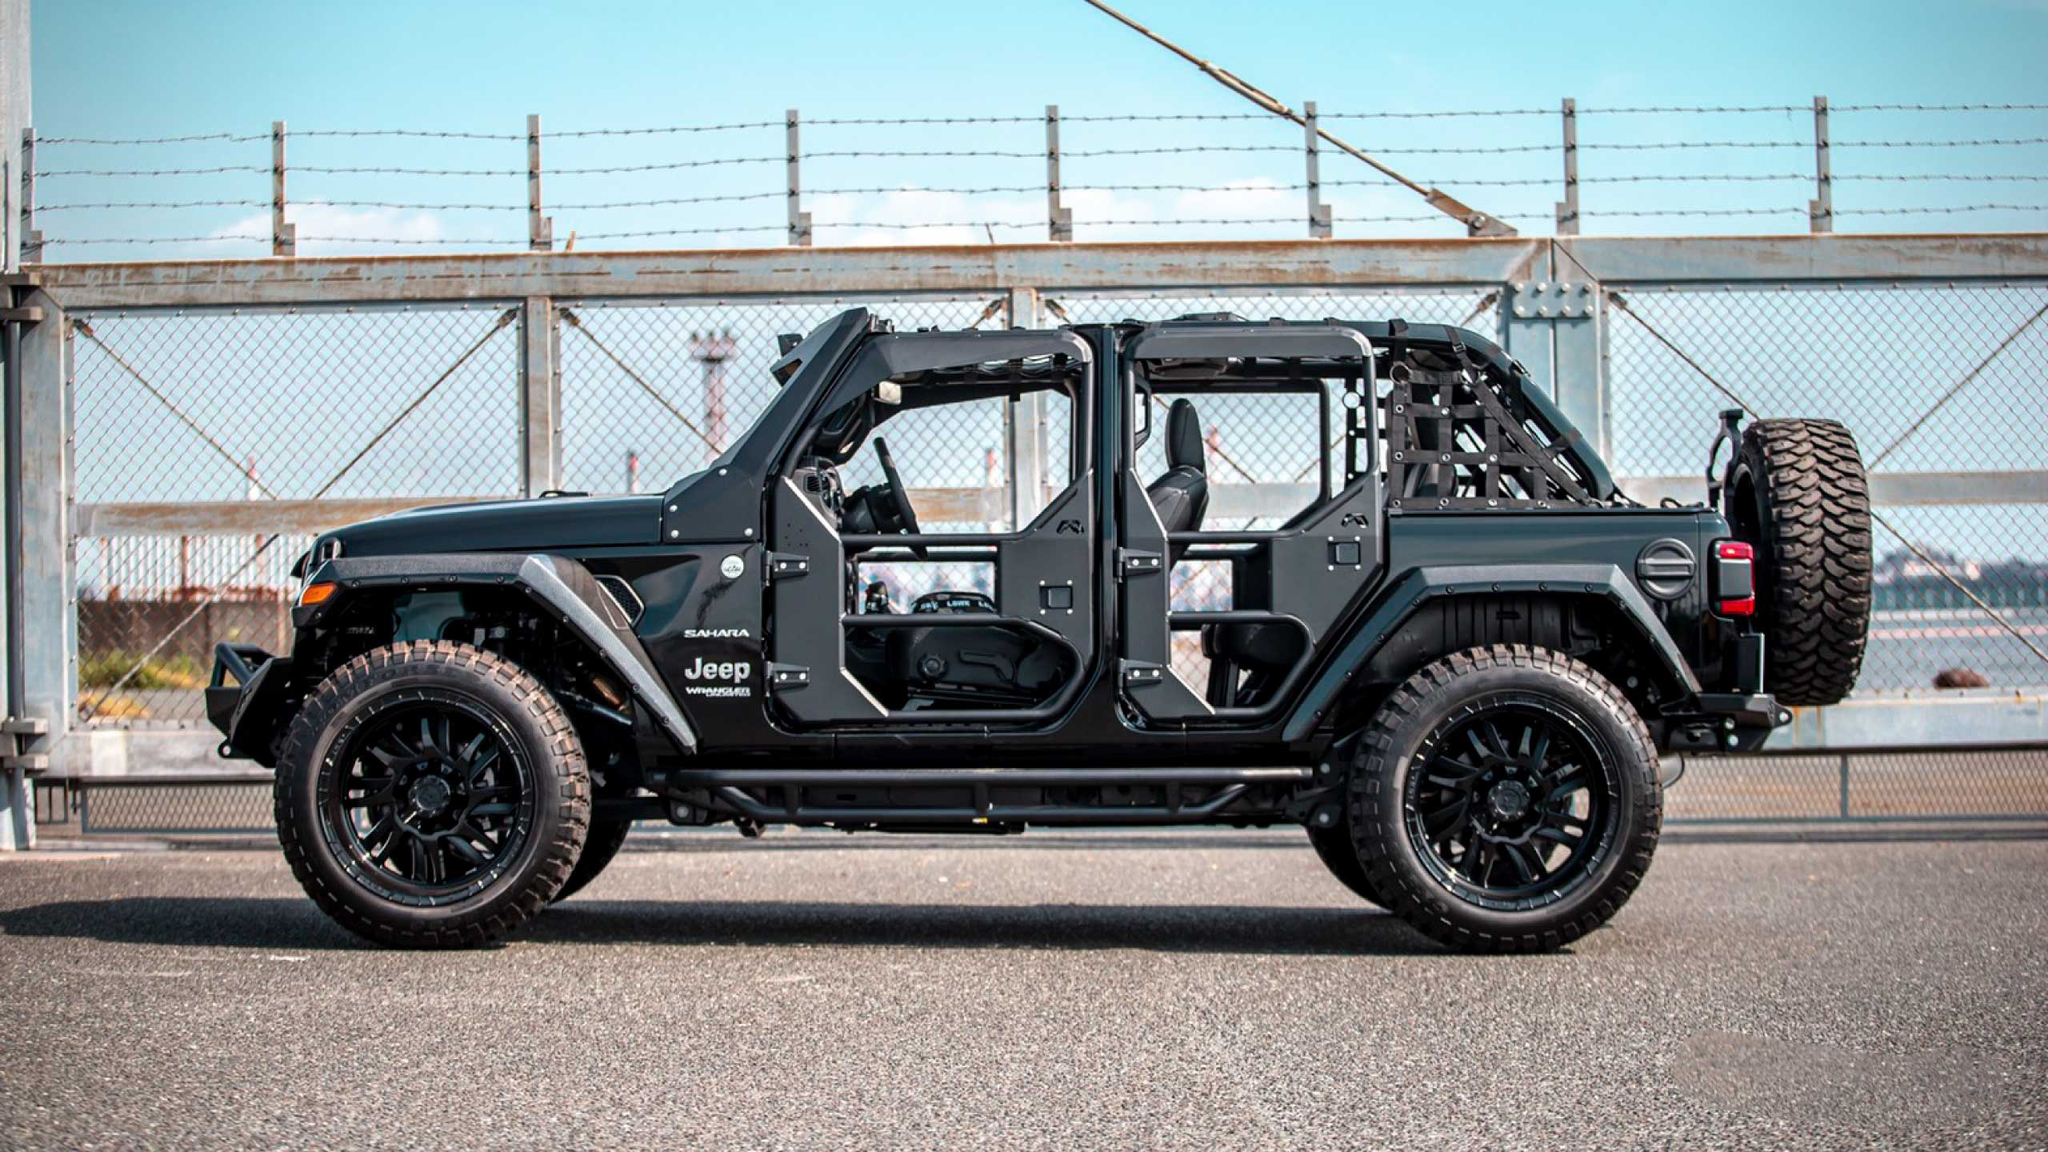 Liberty Walk nation body kit for Fairline Jeep Wrangbr new style